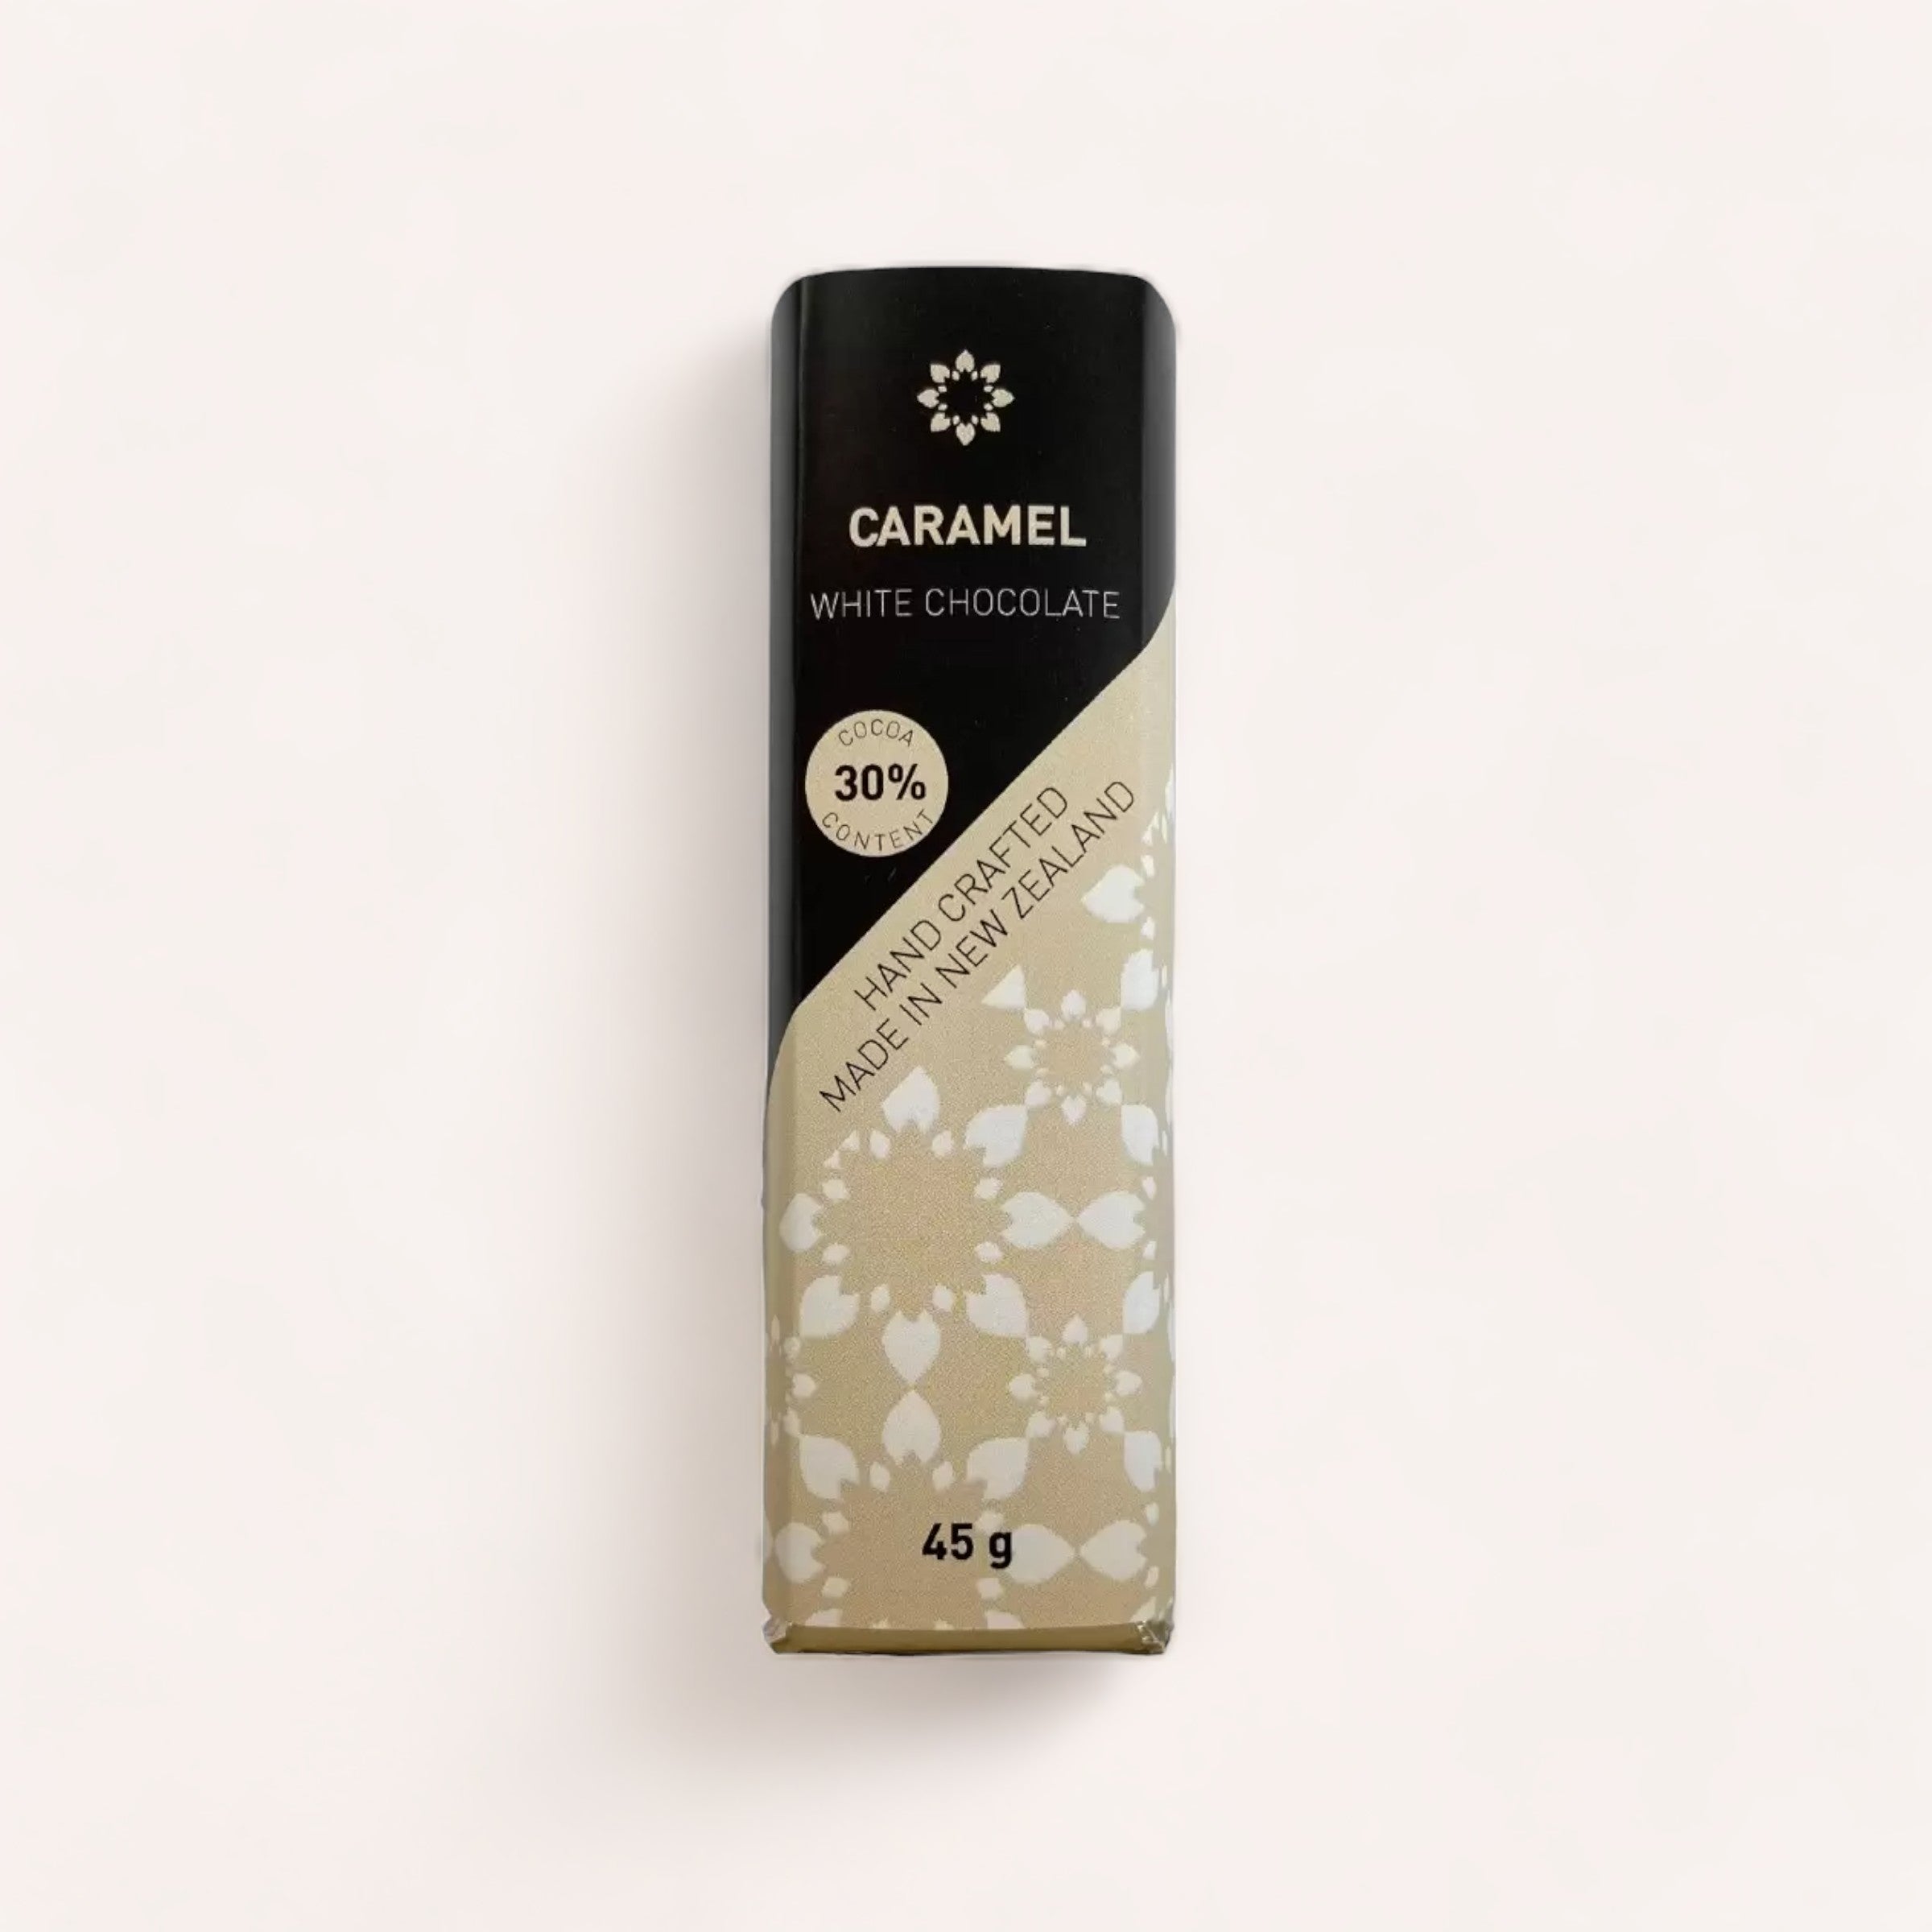 A Caramel White Chocolate bar by Chocolate Traders with a 30% cocoa content, elegantly wrapped and weighing 45 grams. Product of New Zealand.